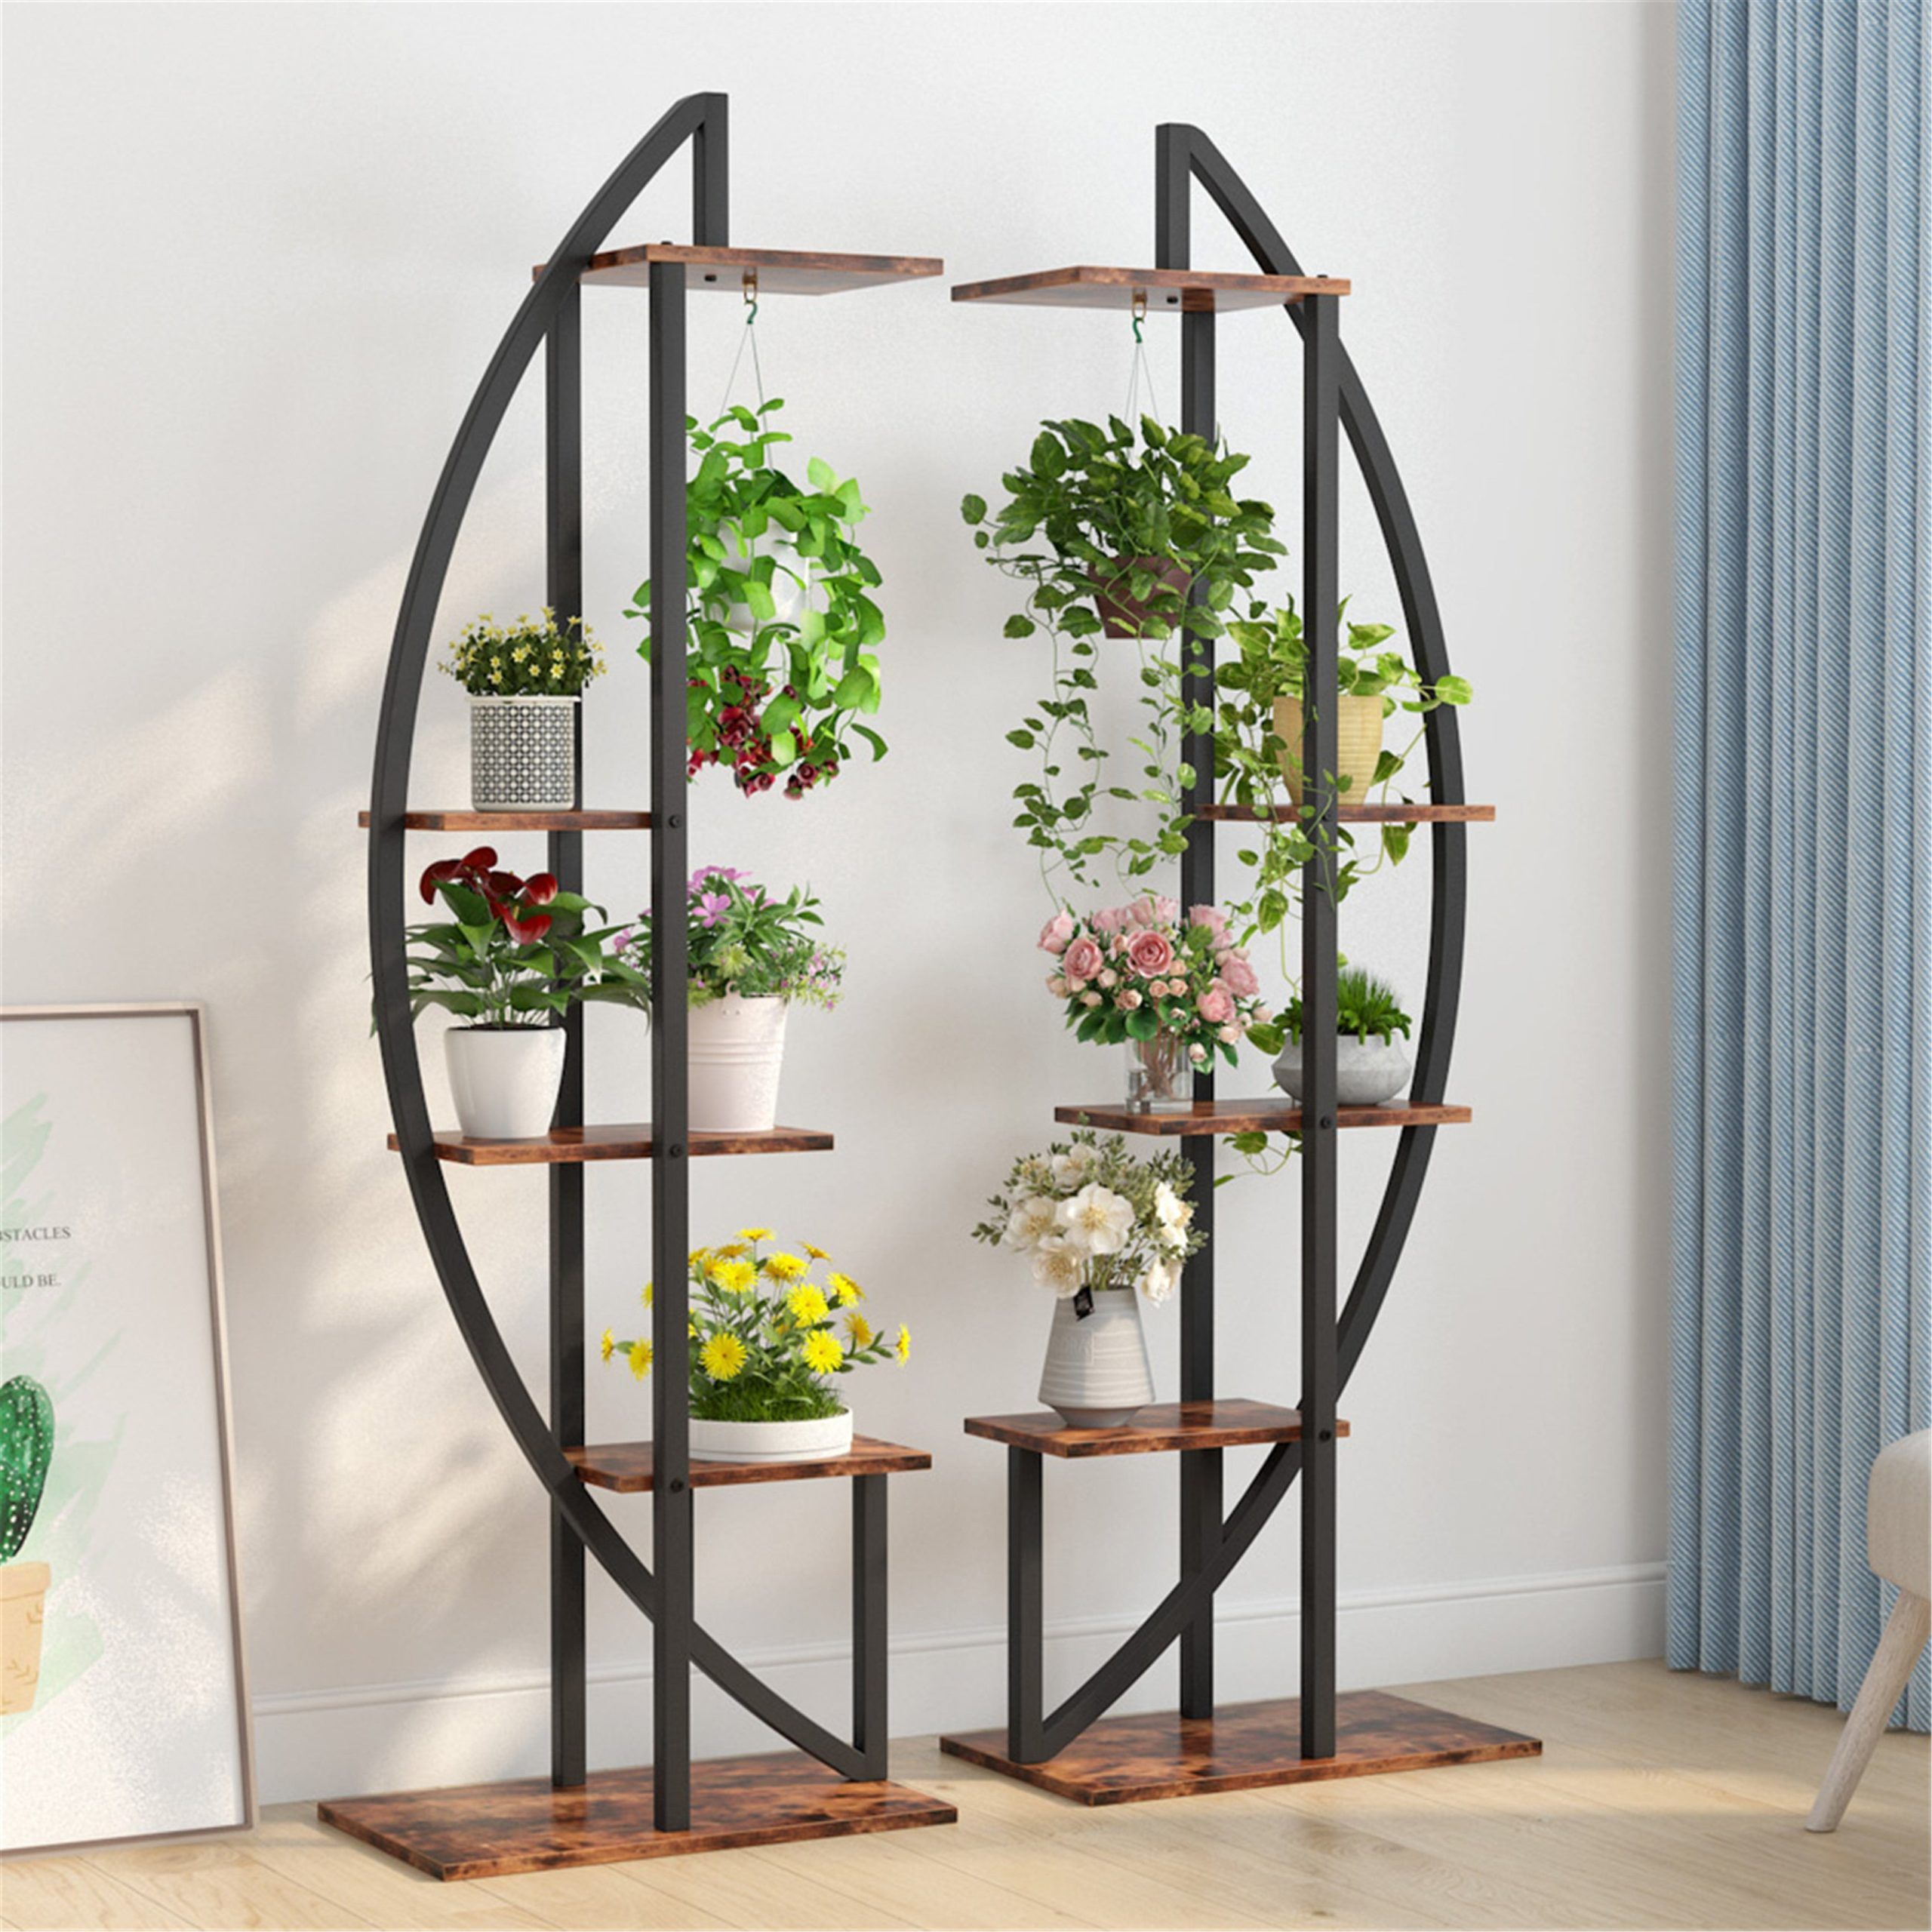 5 Tier Patio Flower Rack Plant Stands (set Of 2) – Overstock – 30393784 Within Patio Flowerpot Stands (View 11 of 15)